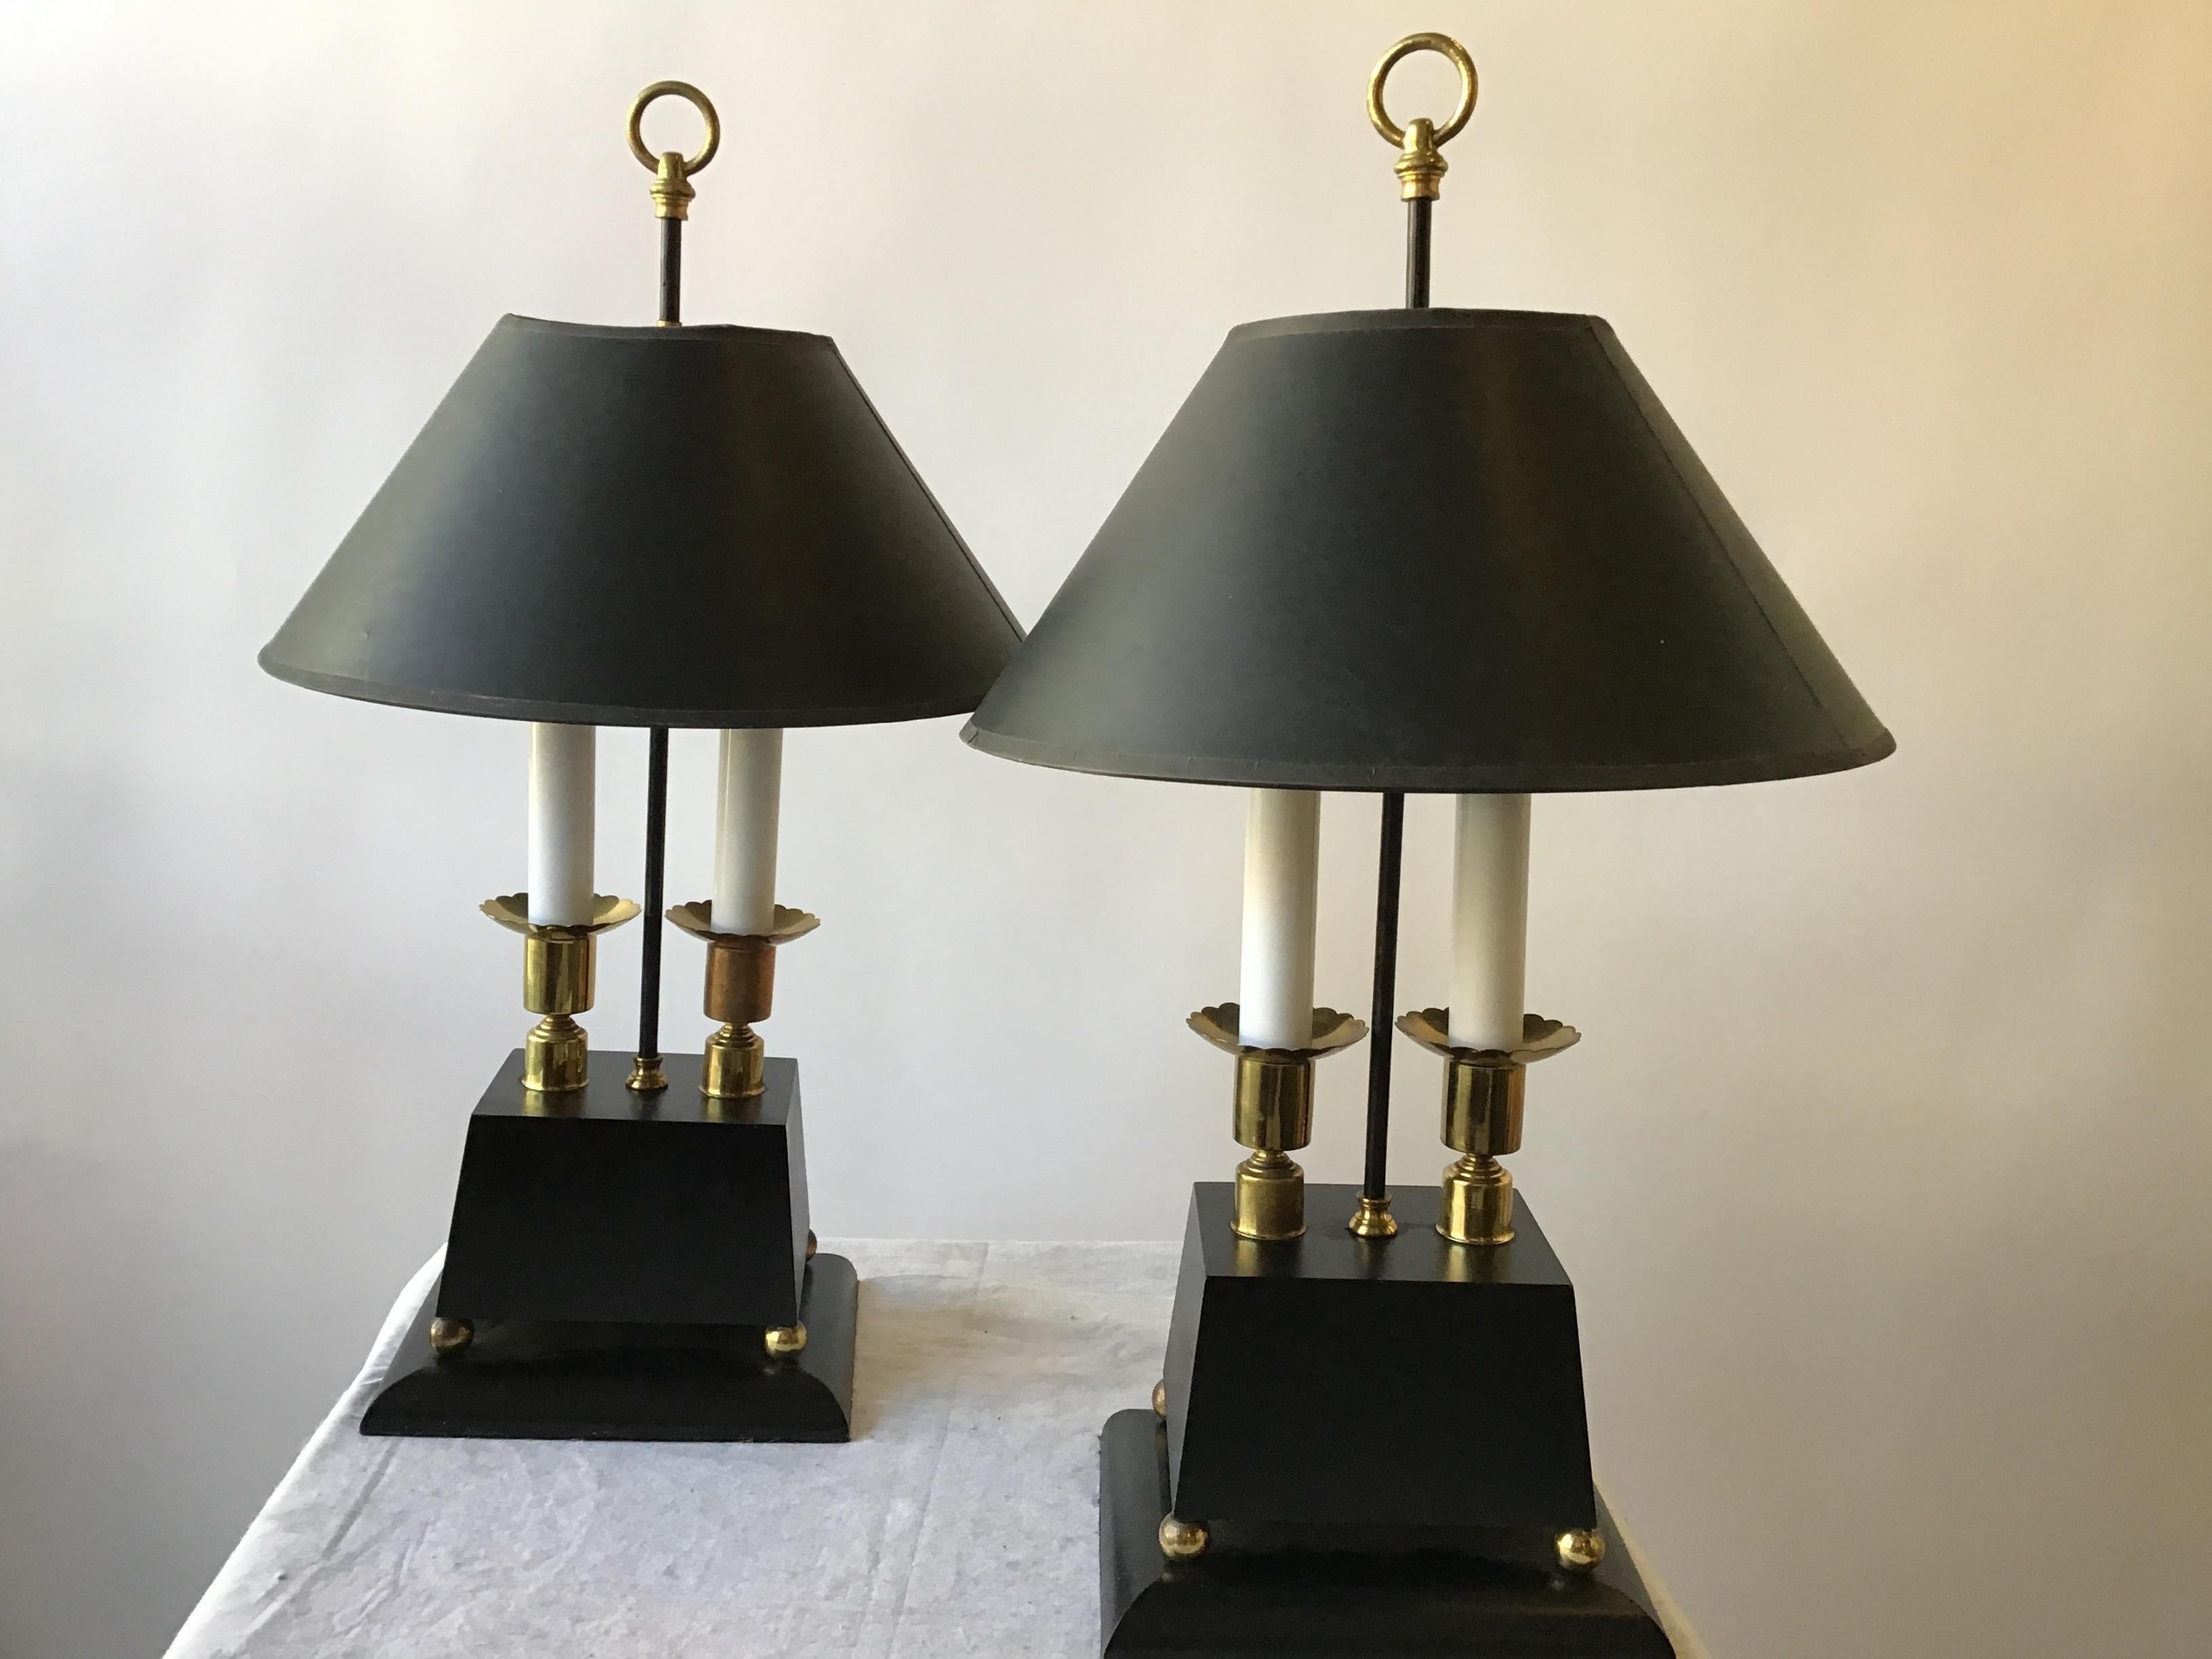 1960s Parzinger style brass lamps on wood bases.